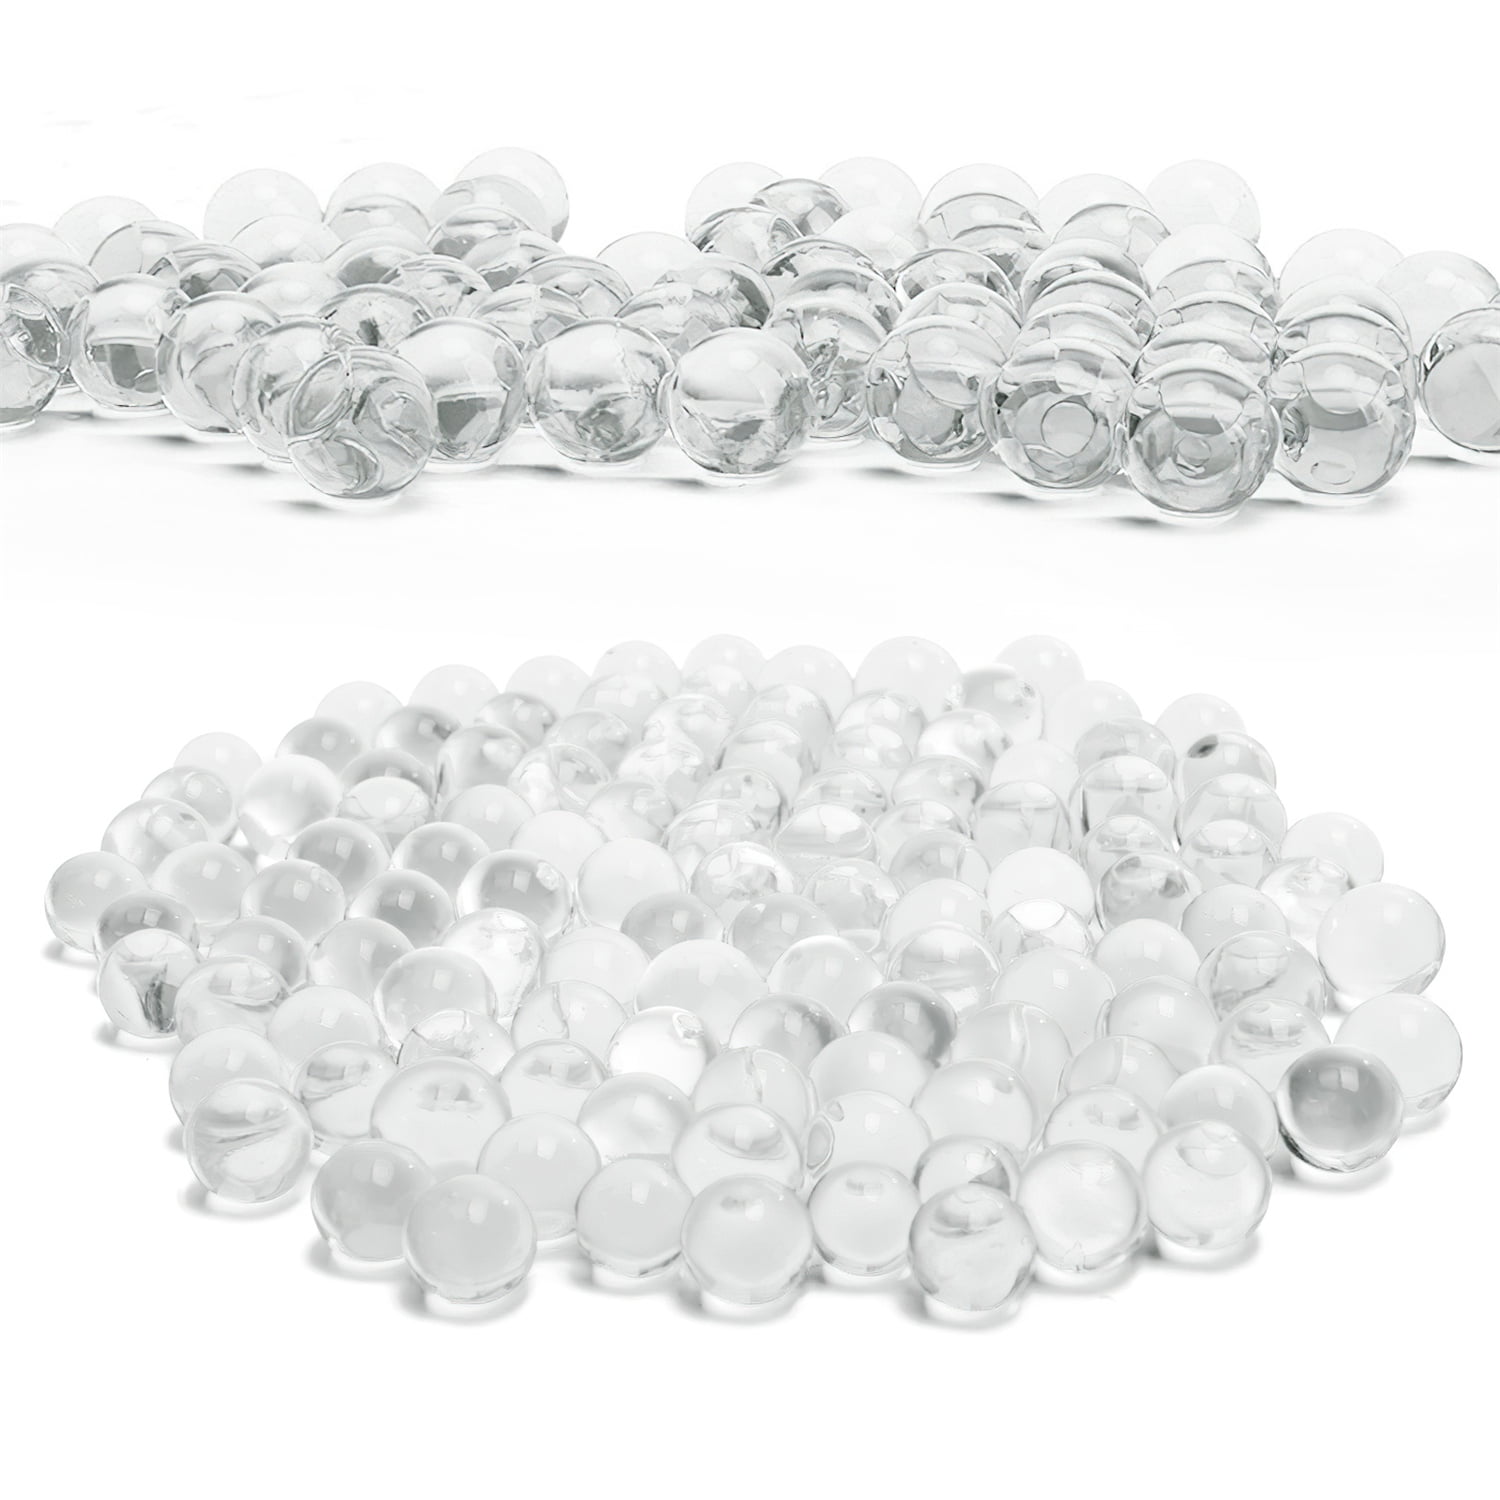 300000 Clear Water Gel Beads Vase Filler Jelly Beads Floating Transparent  Water Gel Pearls For Floating Candle Making, Wedding Centerpieces Planting